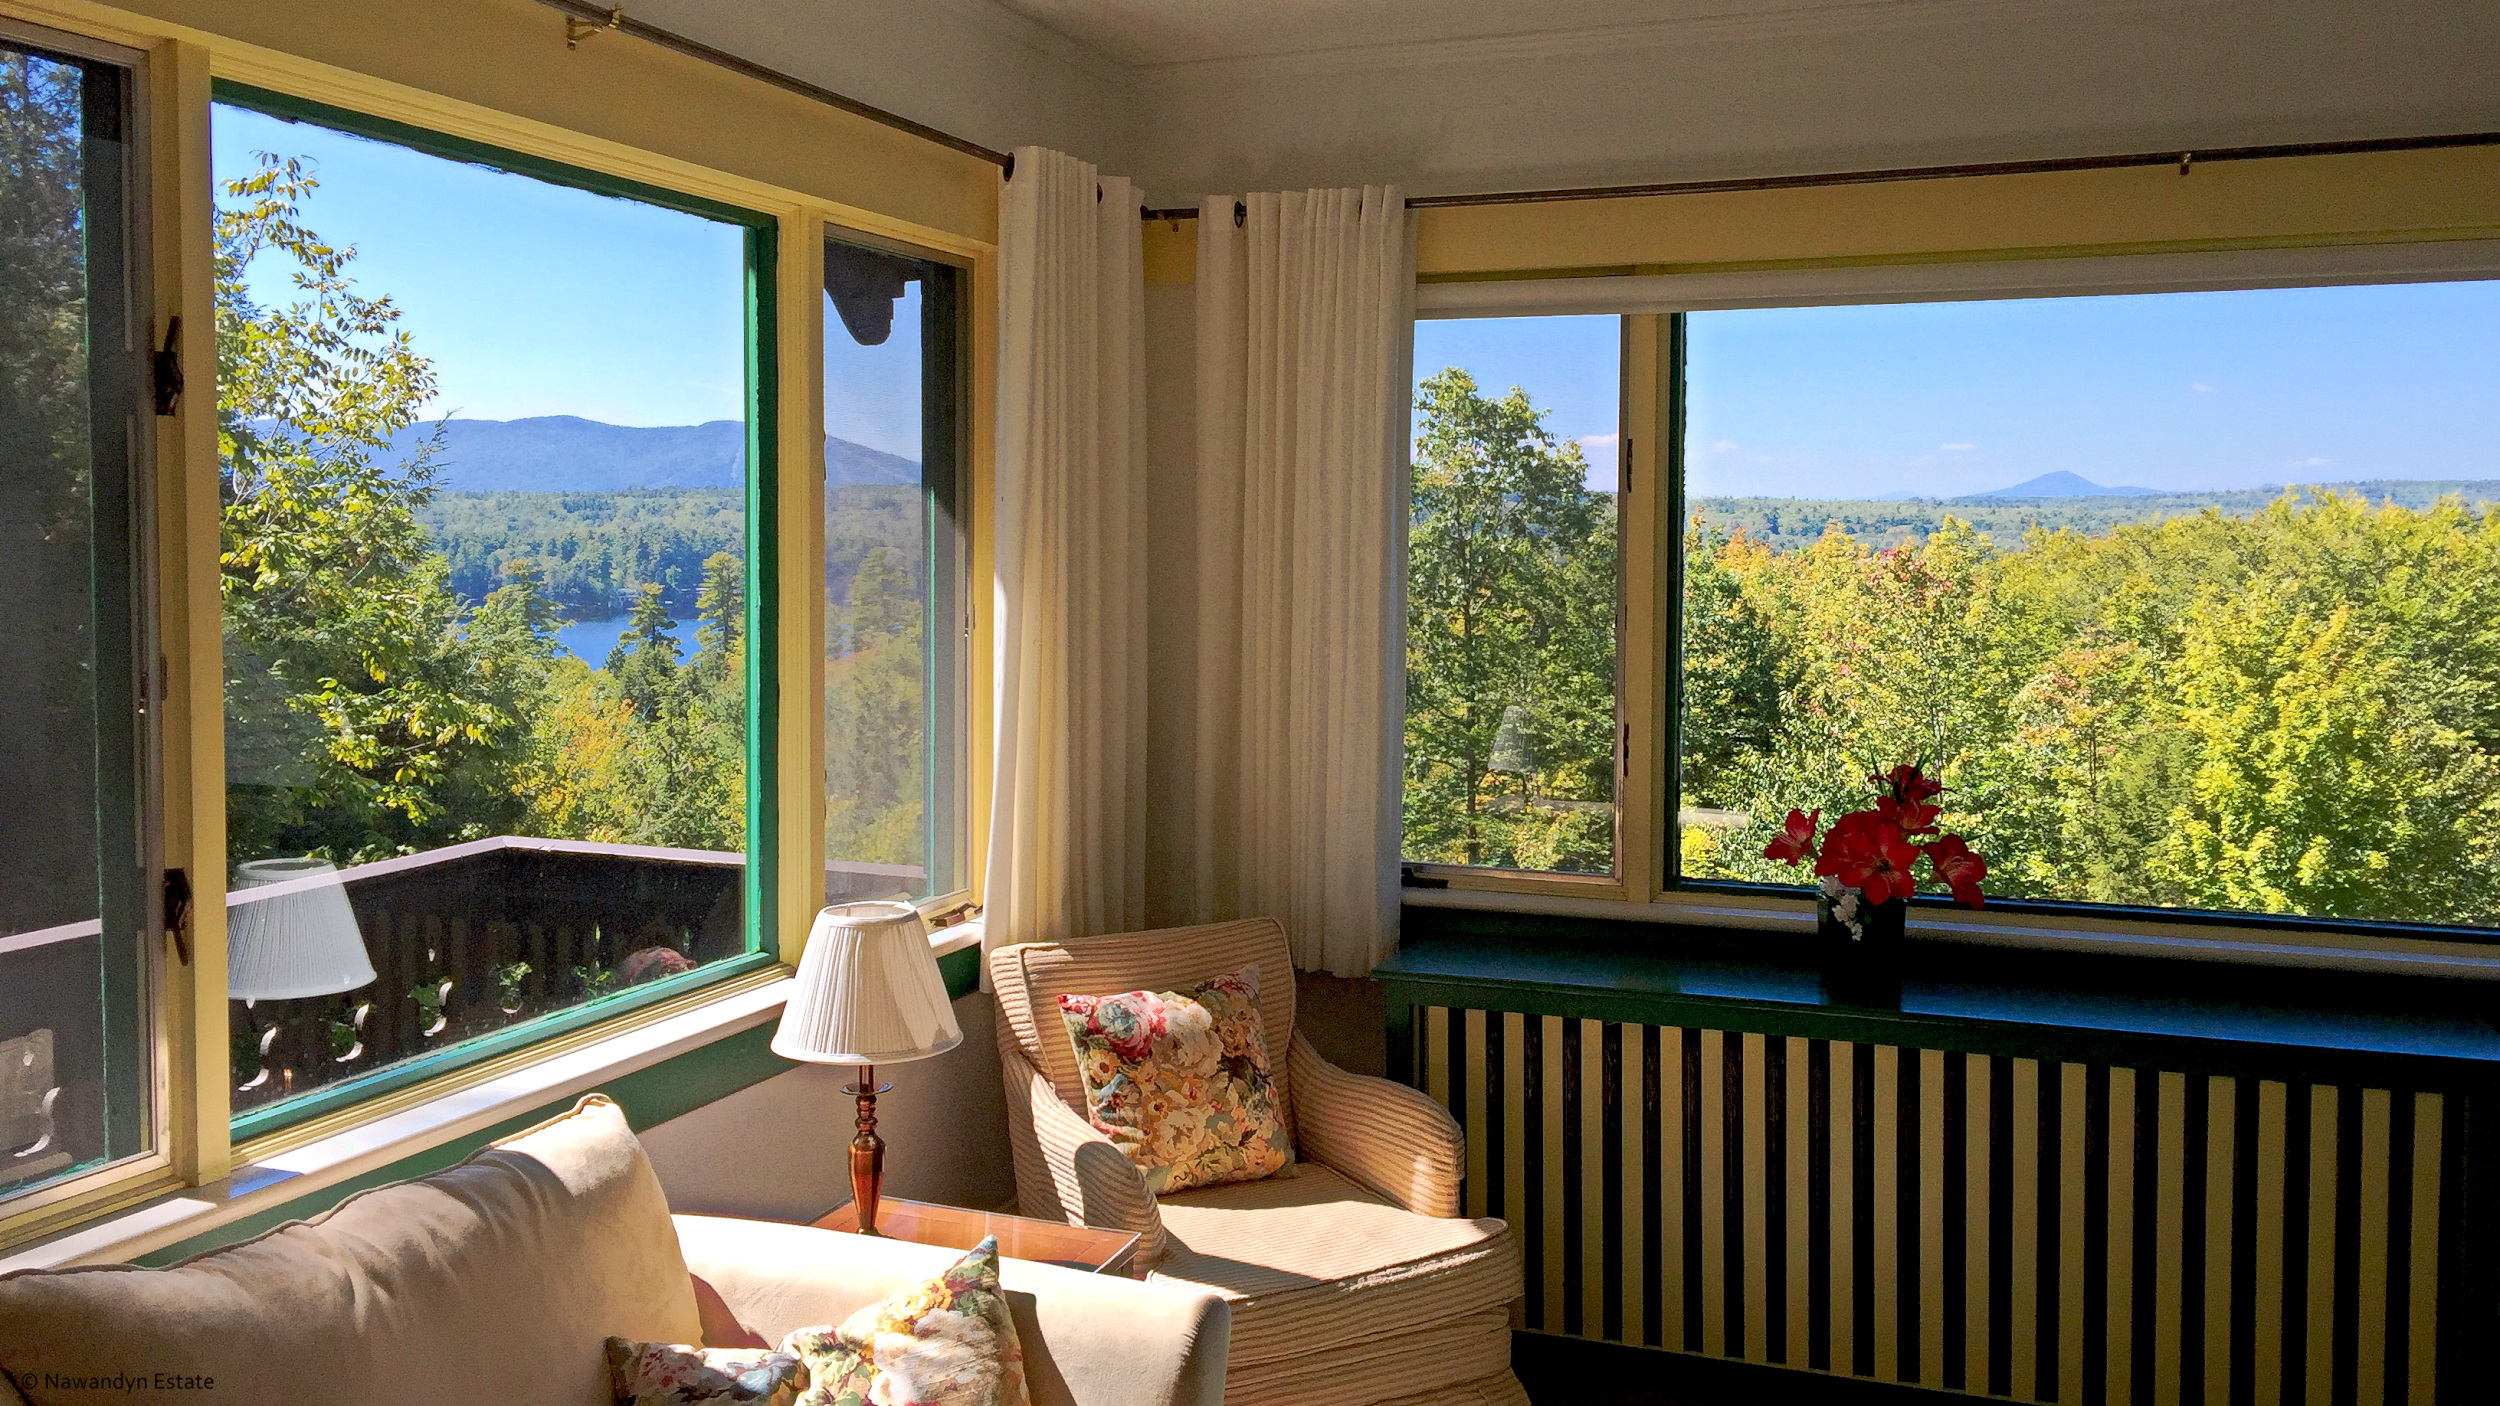 Master Sitting Room's view extends into NH